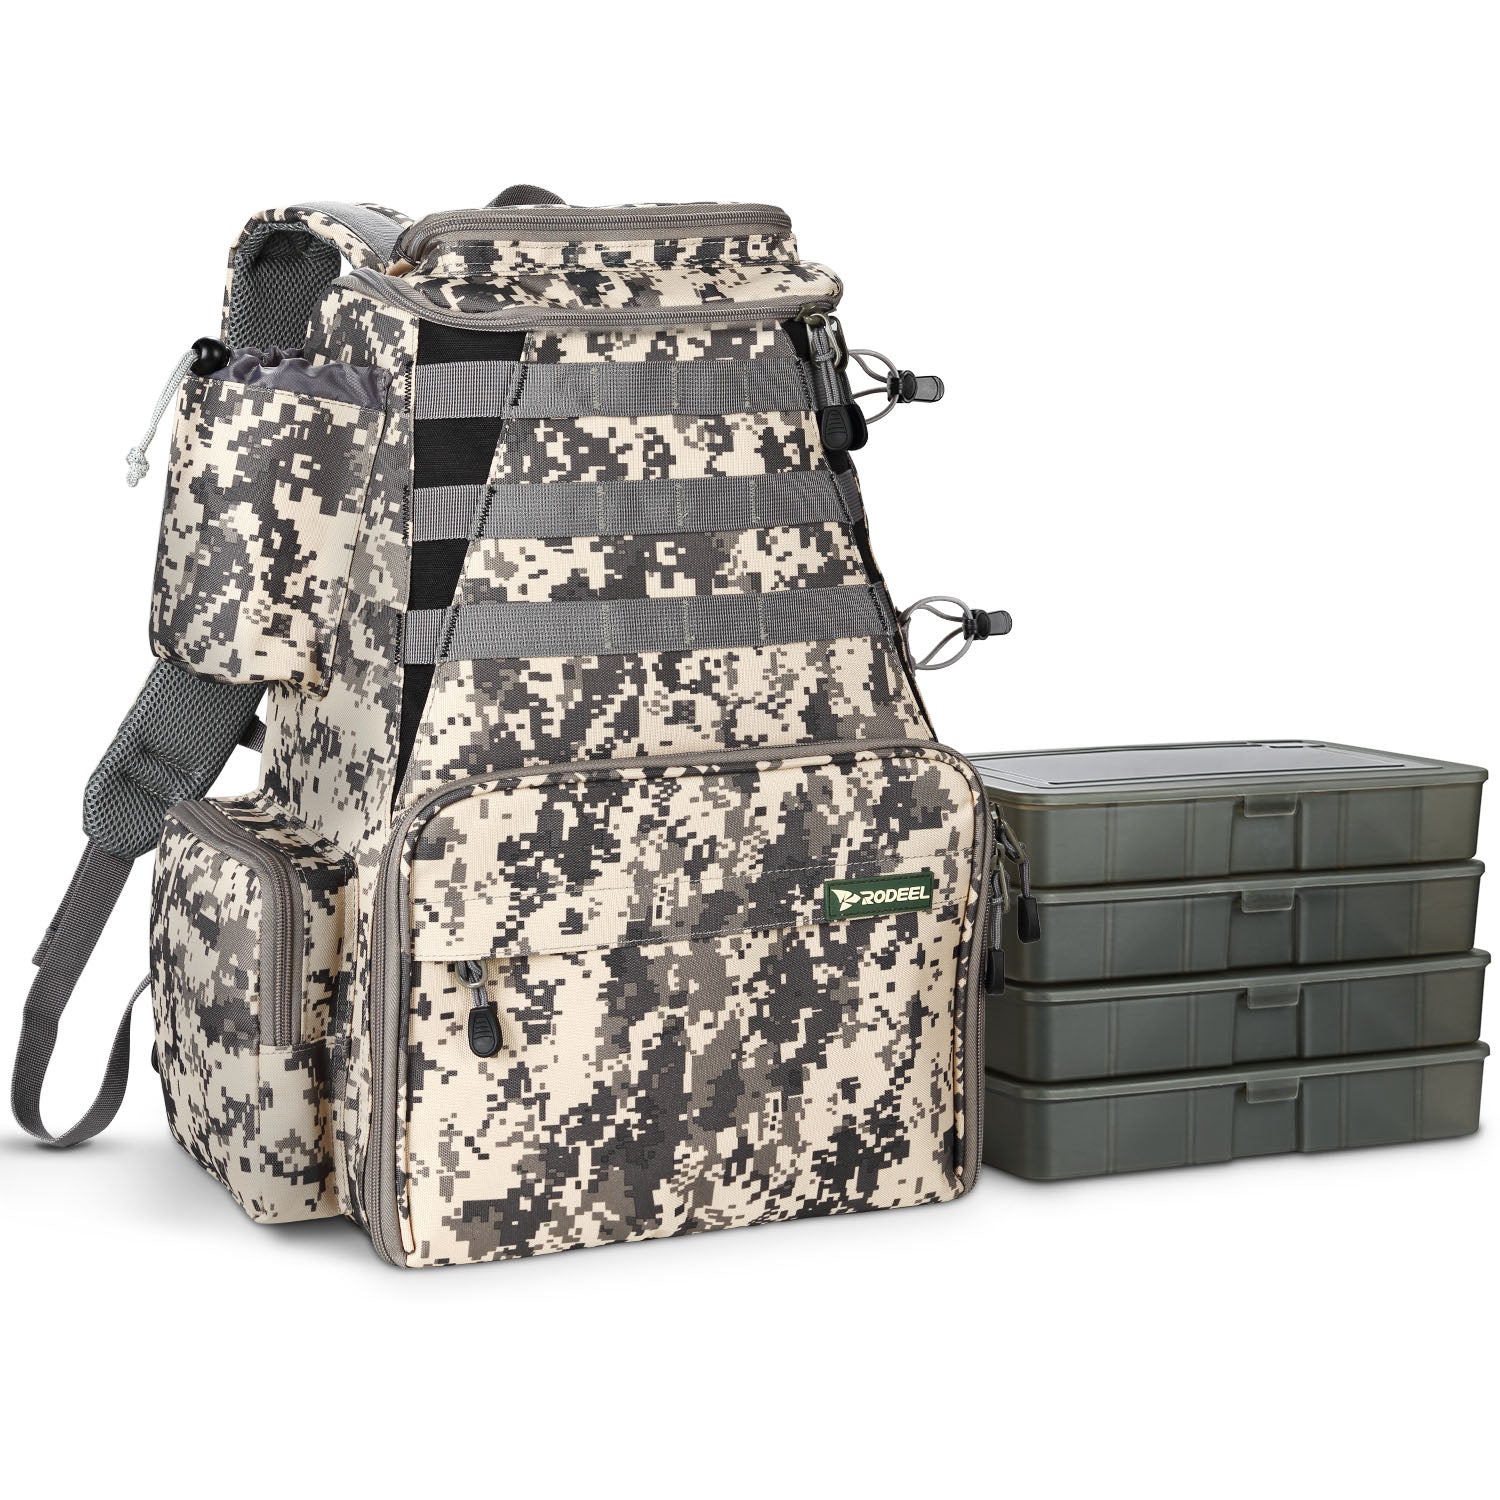 Rodeel Fishing Tackle Bags - Fishing Bags for India